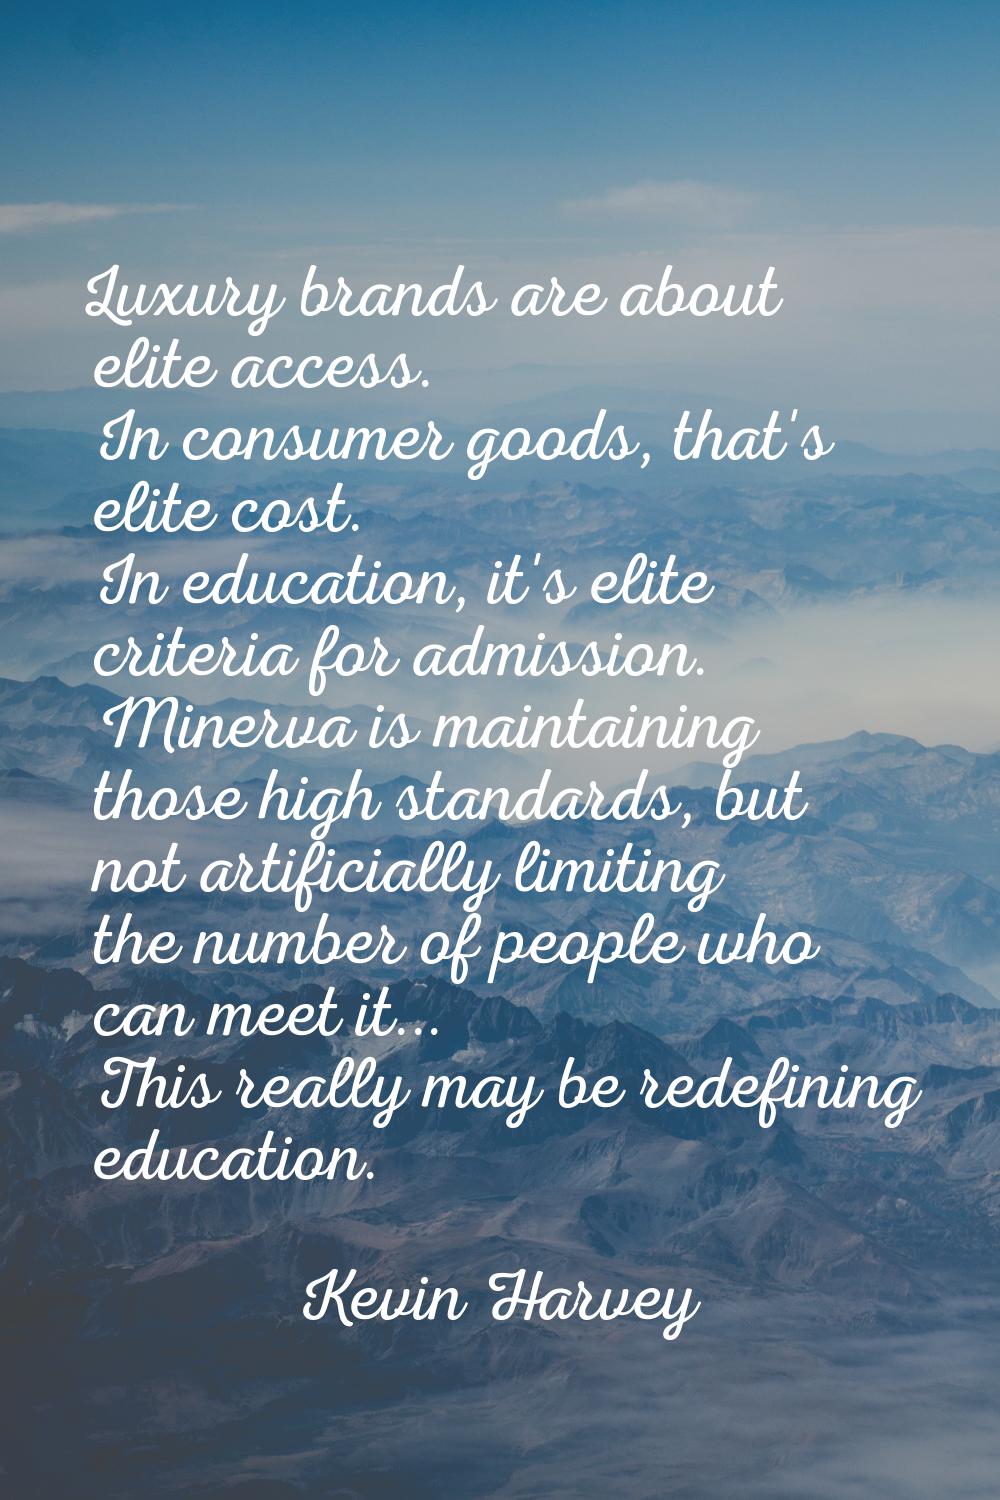 Luxury brands are about elite access. In consumer goods, that's elite cost. In education, it's elit